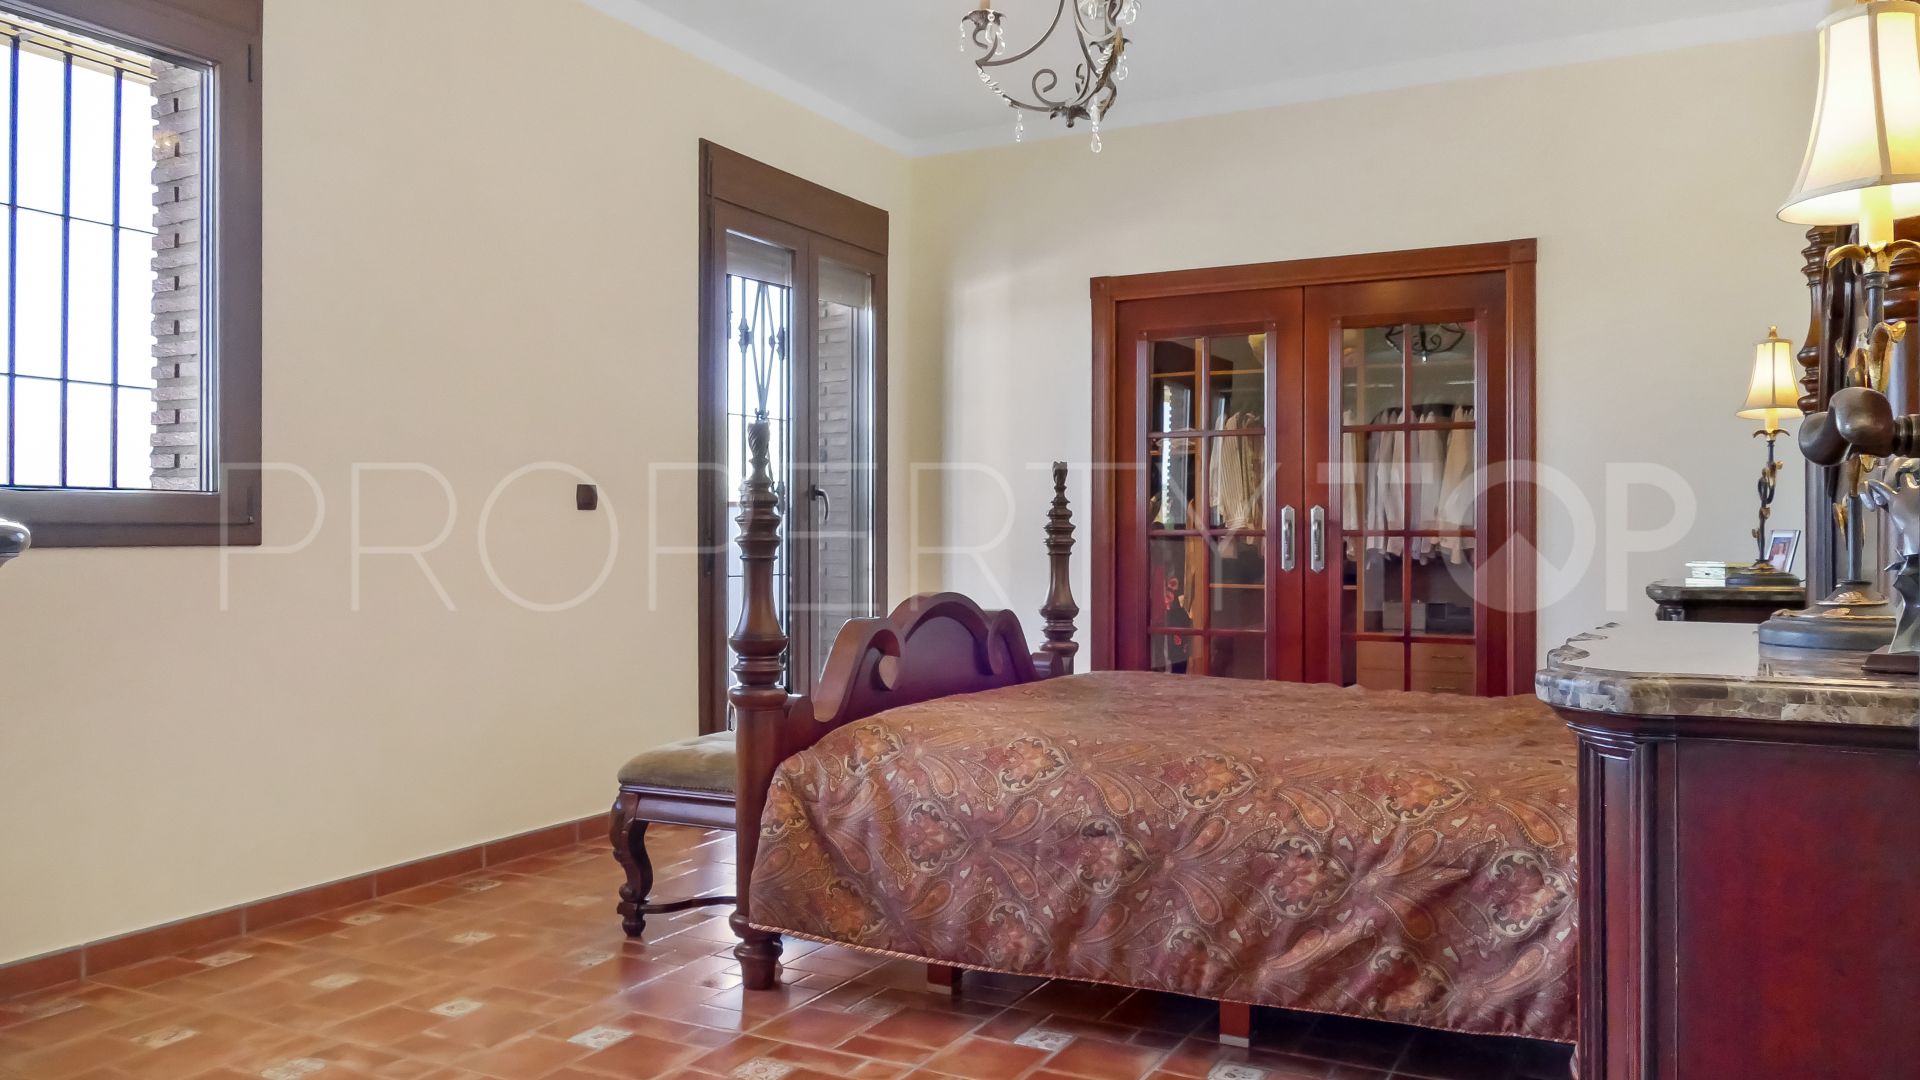 For sale villa with 5 bedrooms in Loja